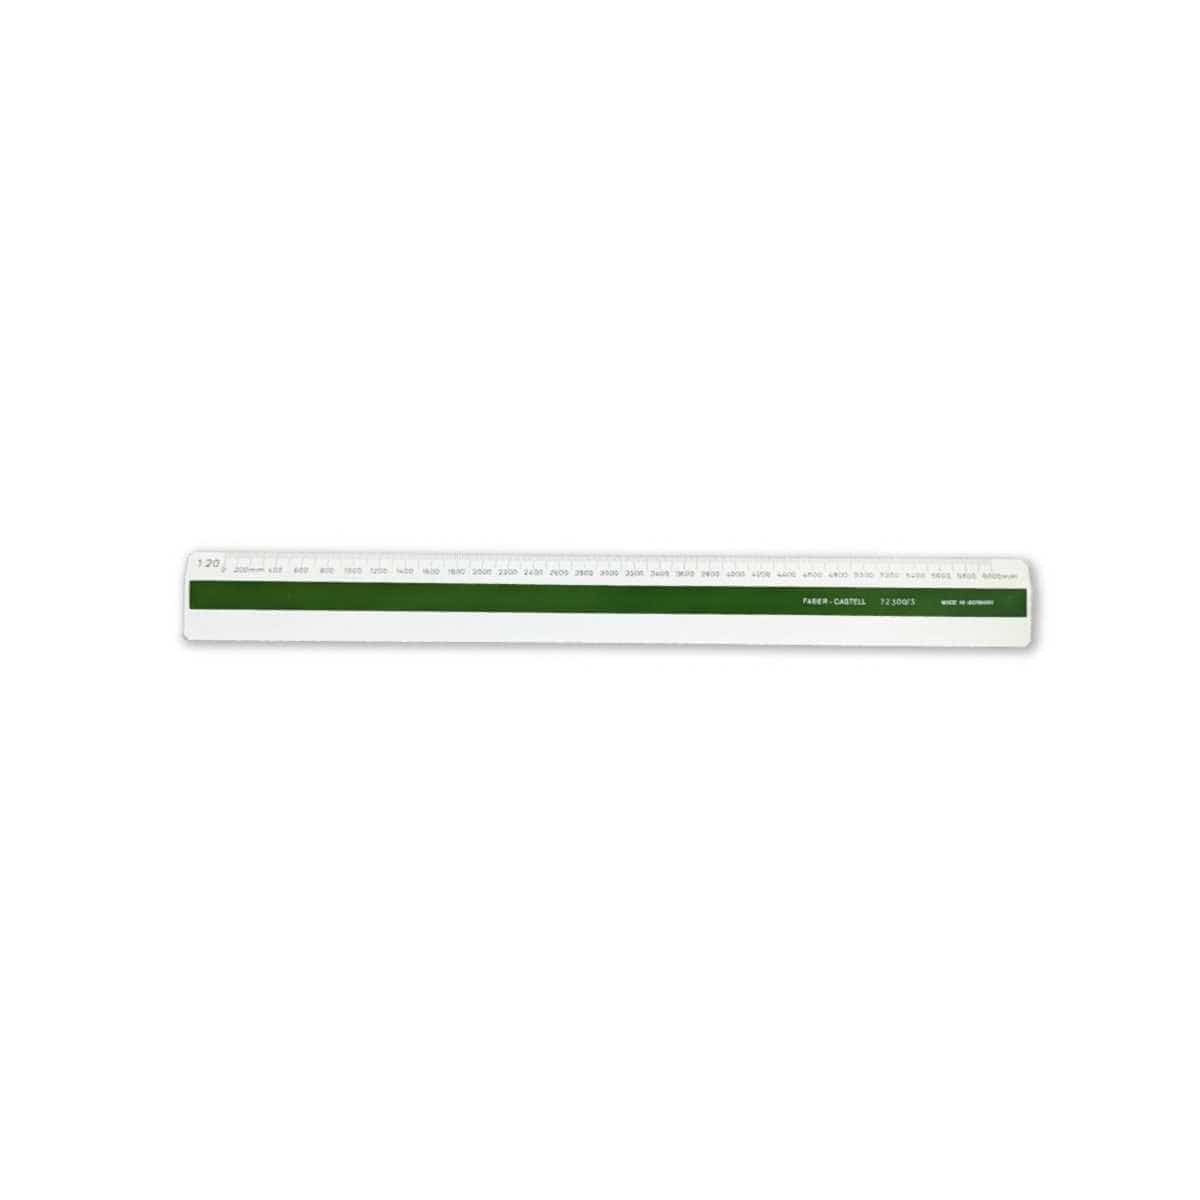 Faber-Castell Scale Ruler Faber-Castell - Scale Ruler - 1:20/1:50 - Item #72300/3